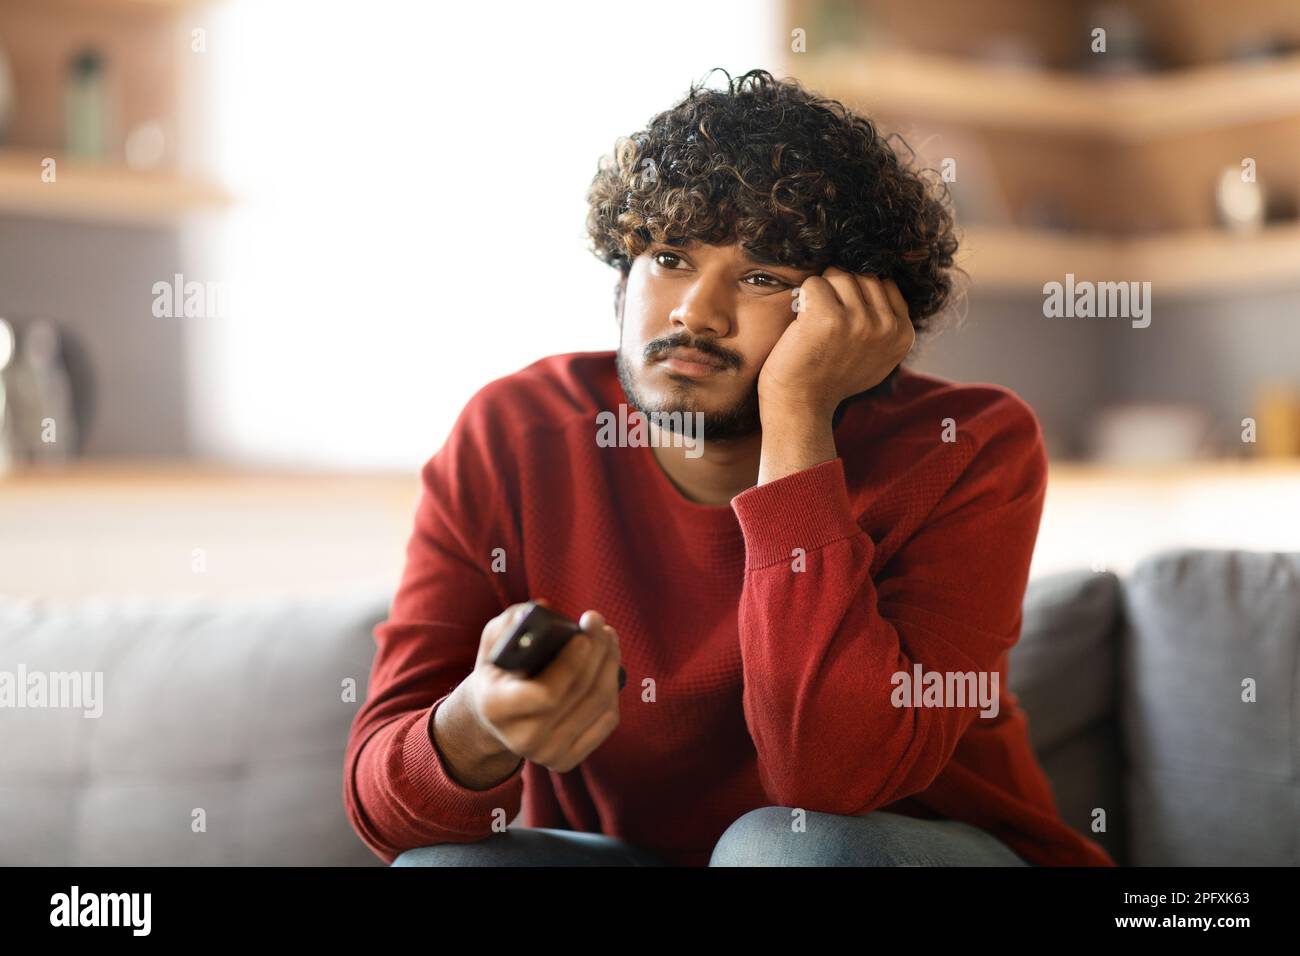 Boring Program. Portrait Of Upset Young Indian Man Watching TV At Home Stock Photo